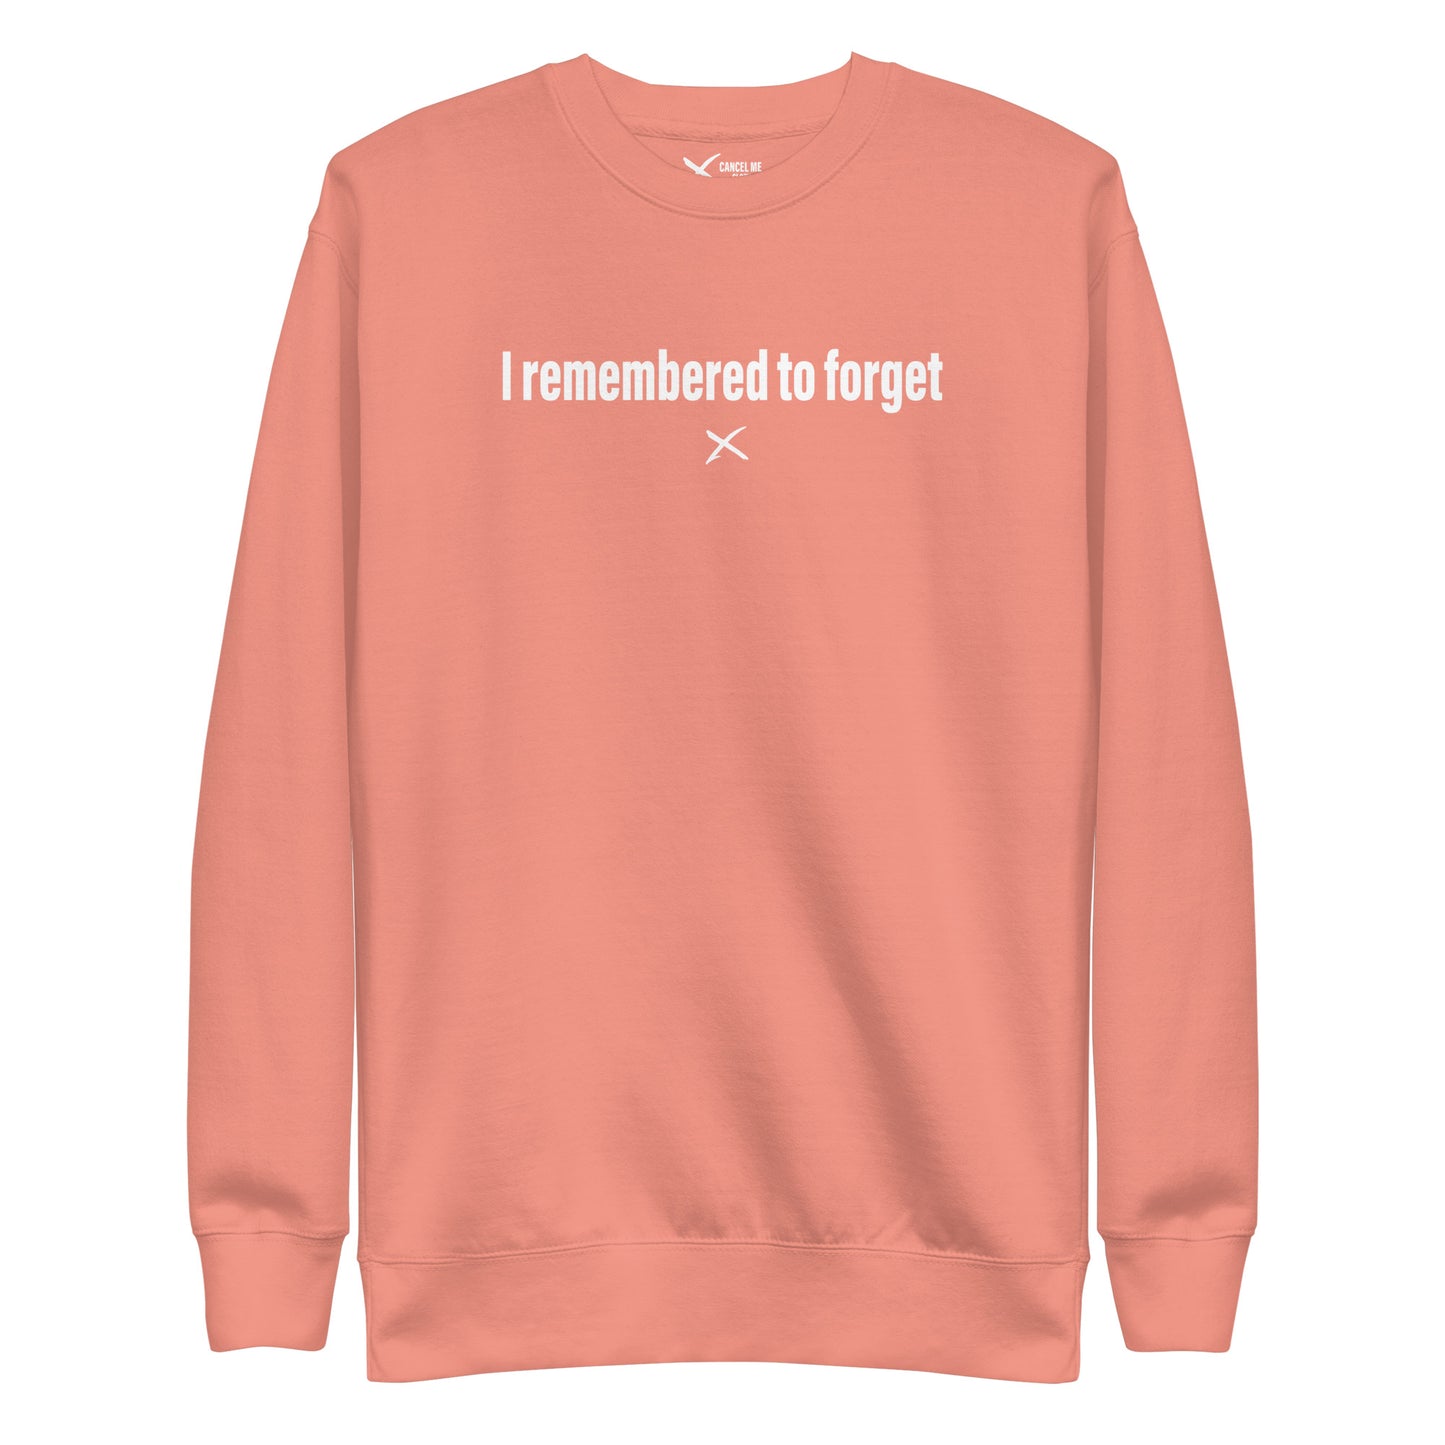 I remembered to forget - Sweatshirt